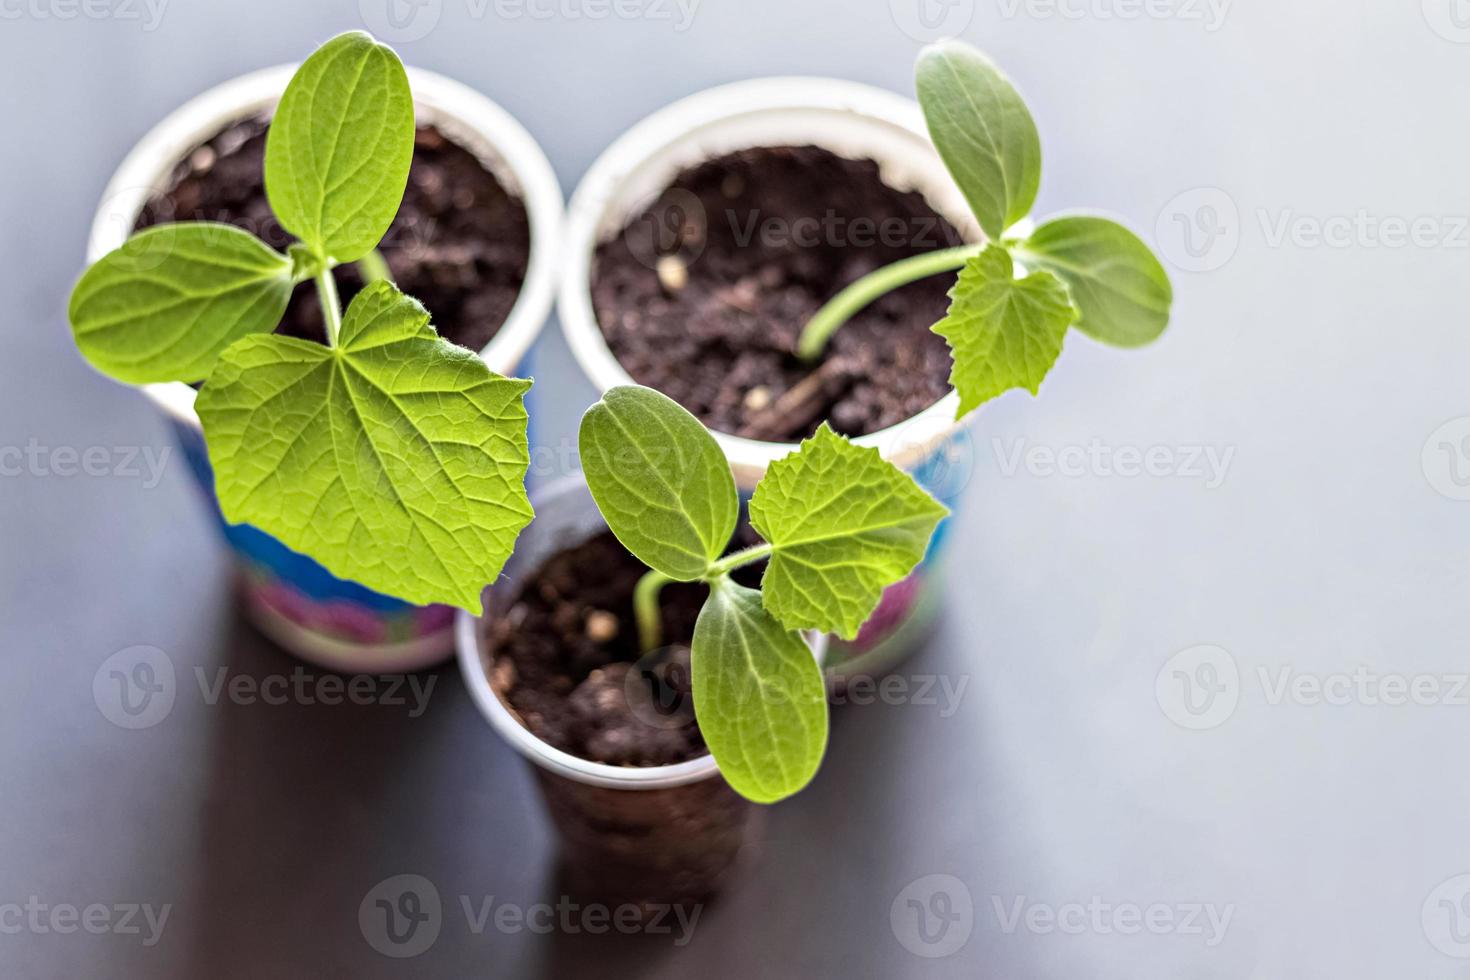 Vegetable sprouts. Growing young cucumber seedlings in cups. Horticulture and harvest concept. photo